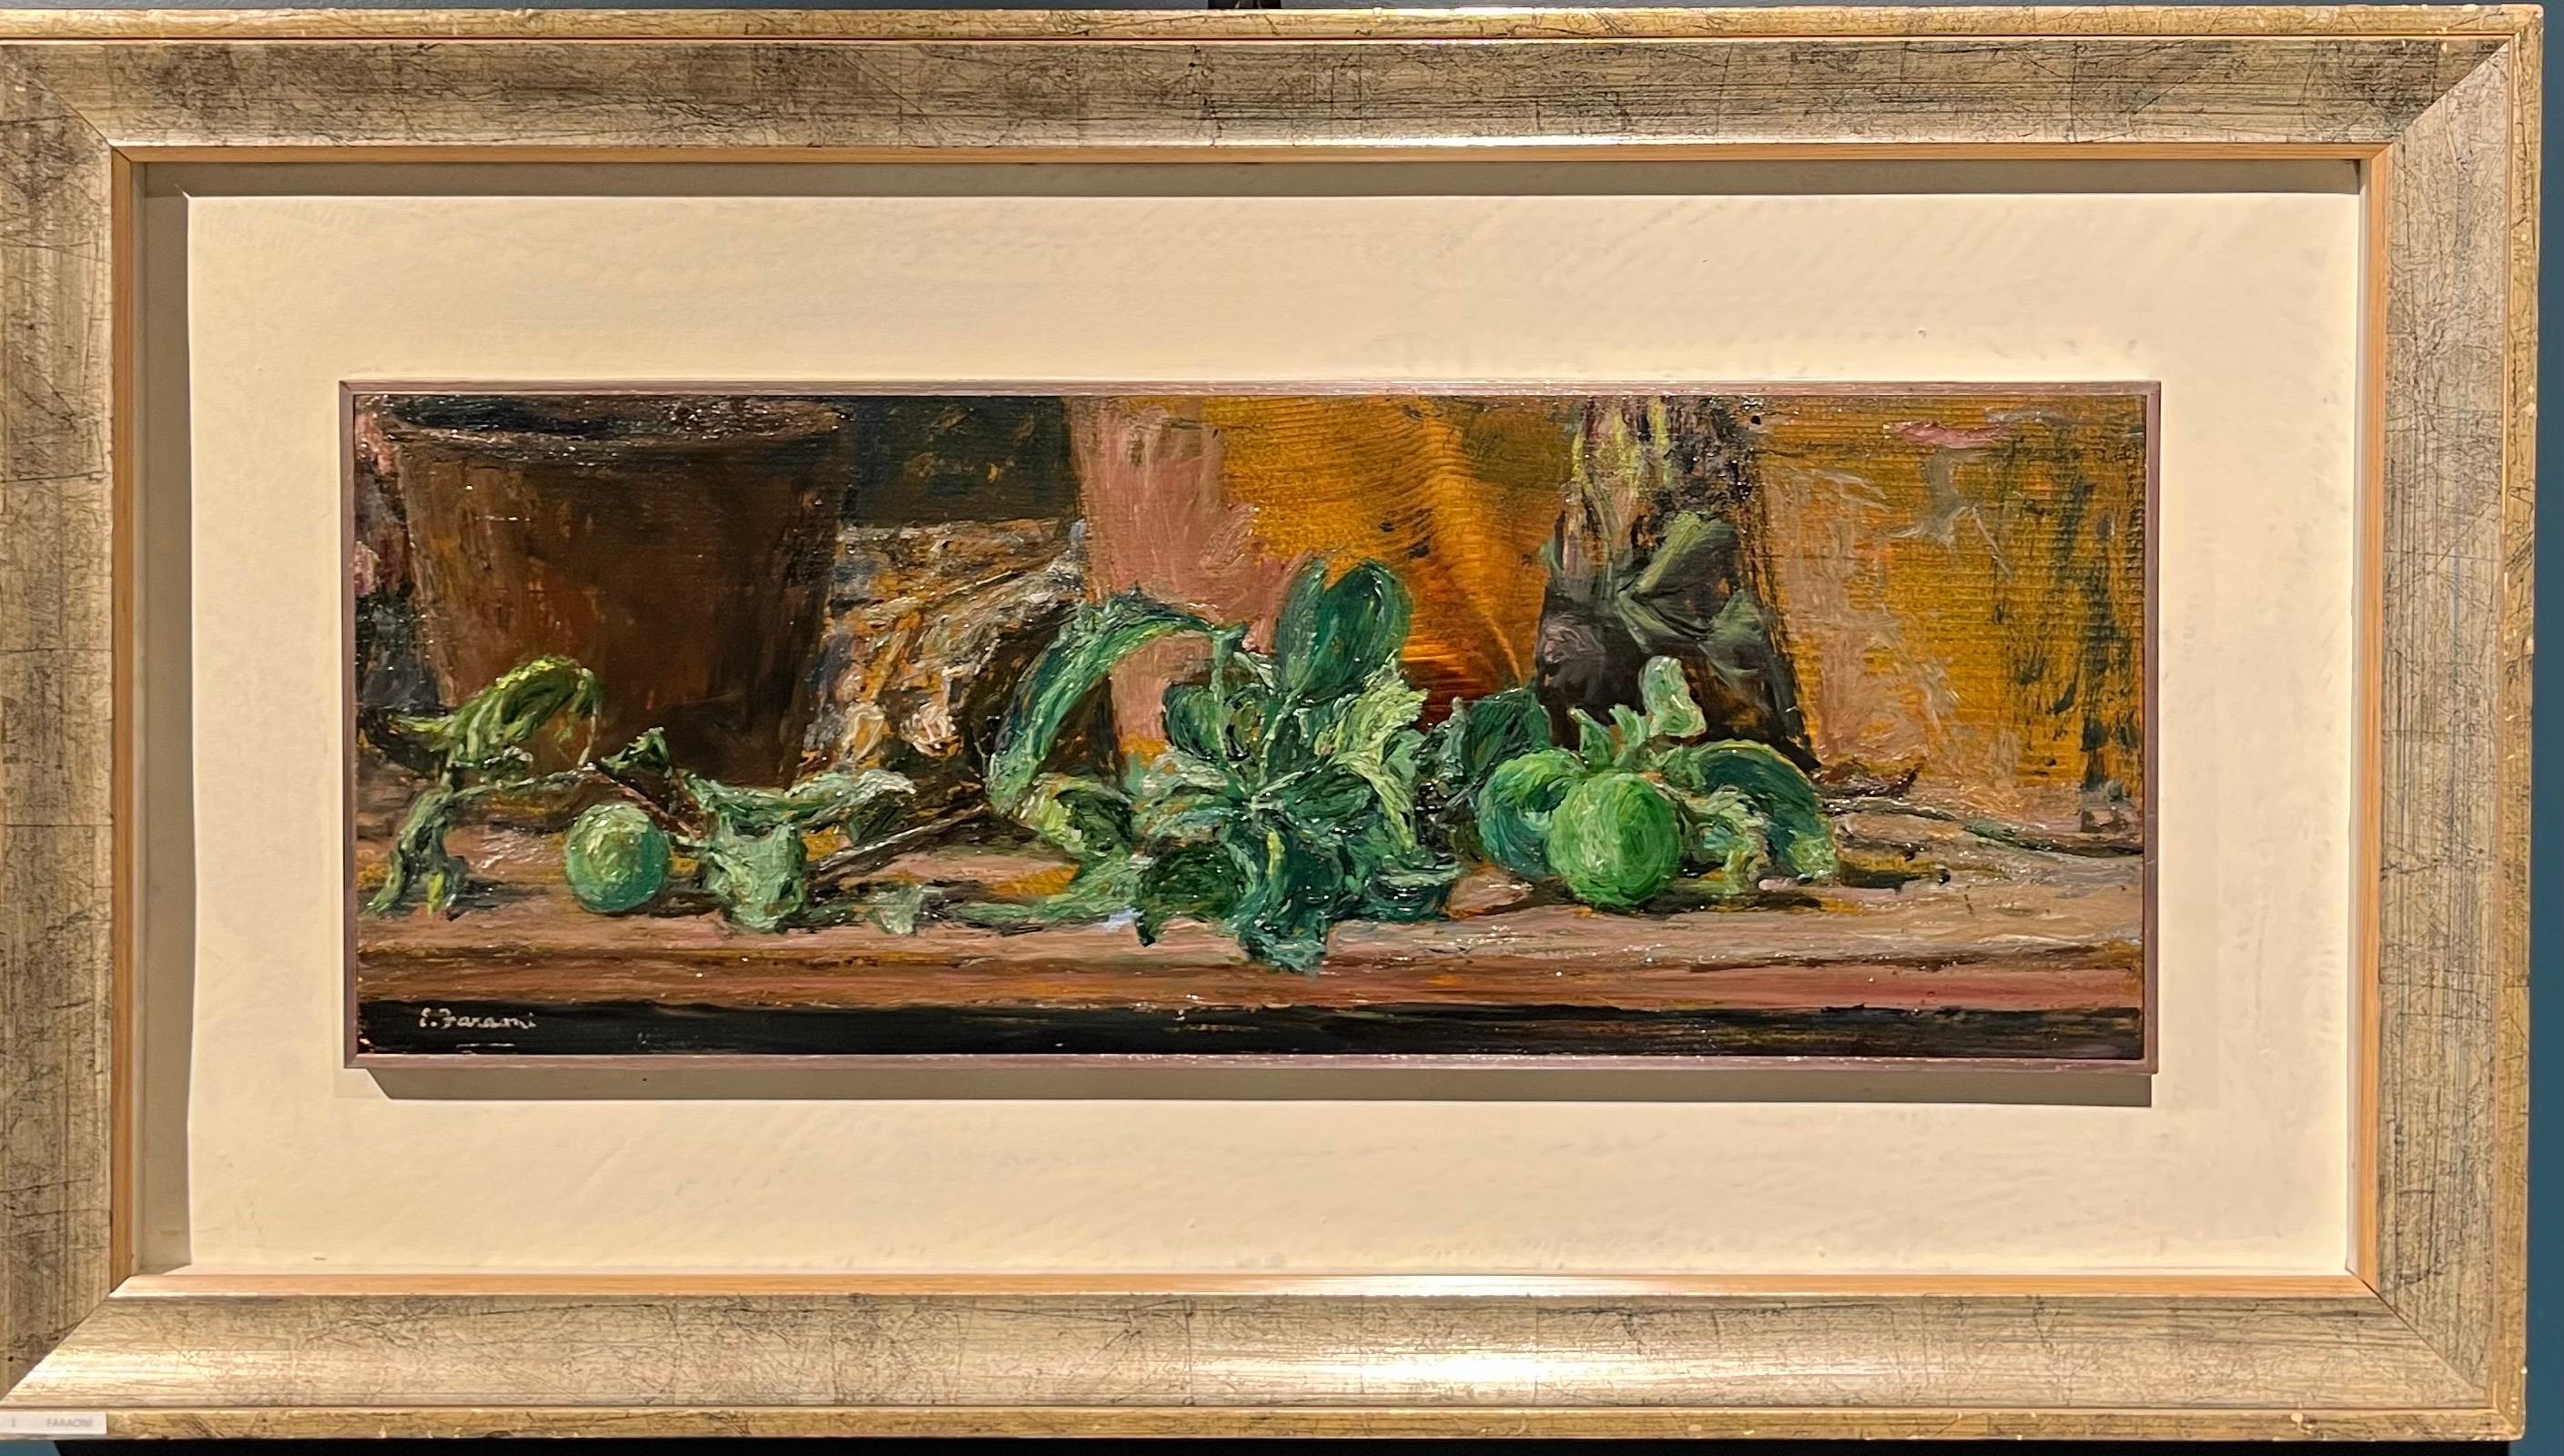 Enzo FARAONI Figurative Painting - "Green apples on the table" Oil on wood cm. 63 x 25 1970